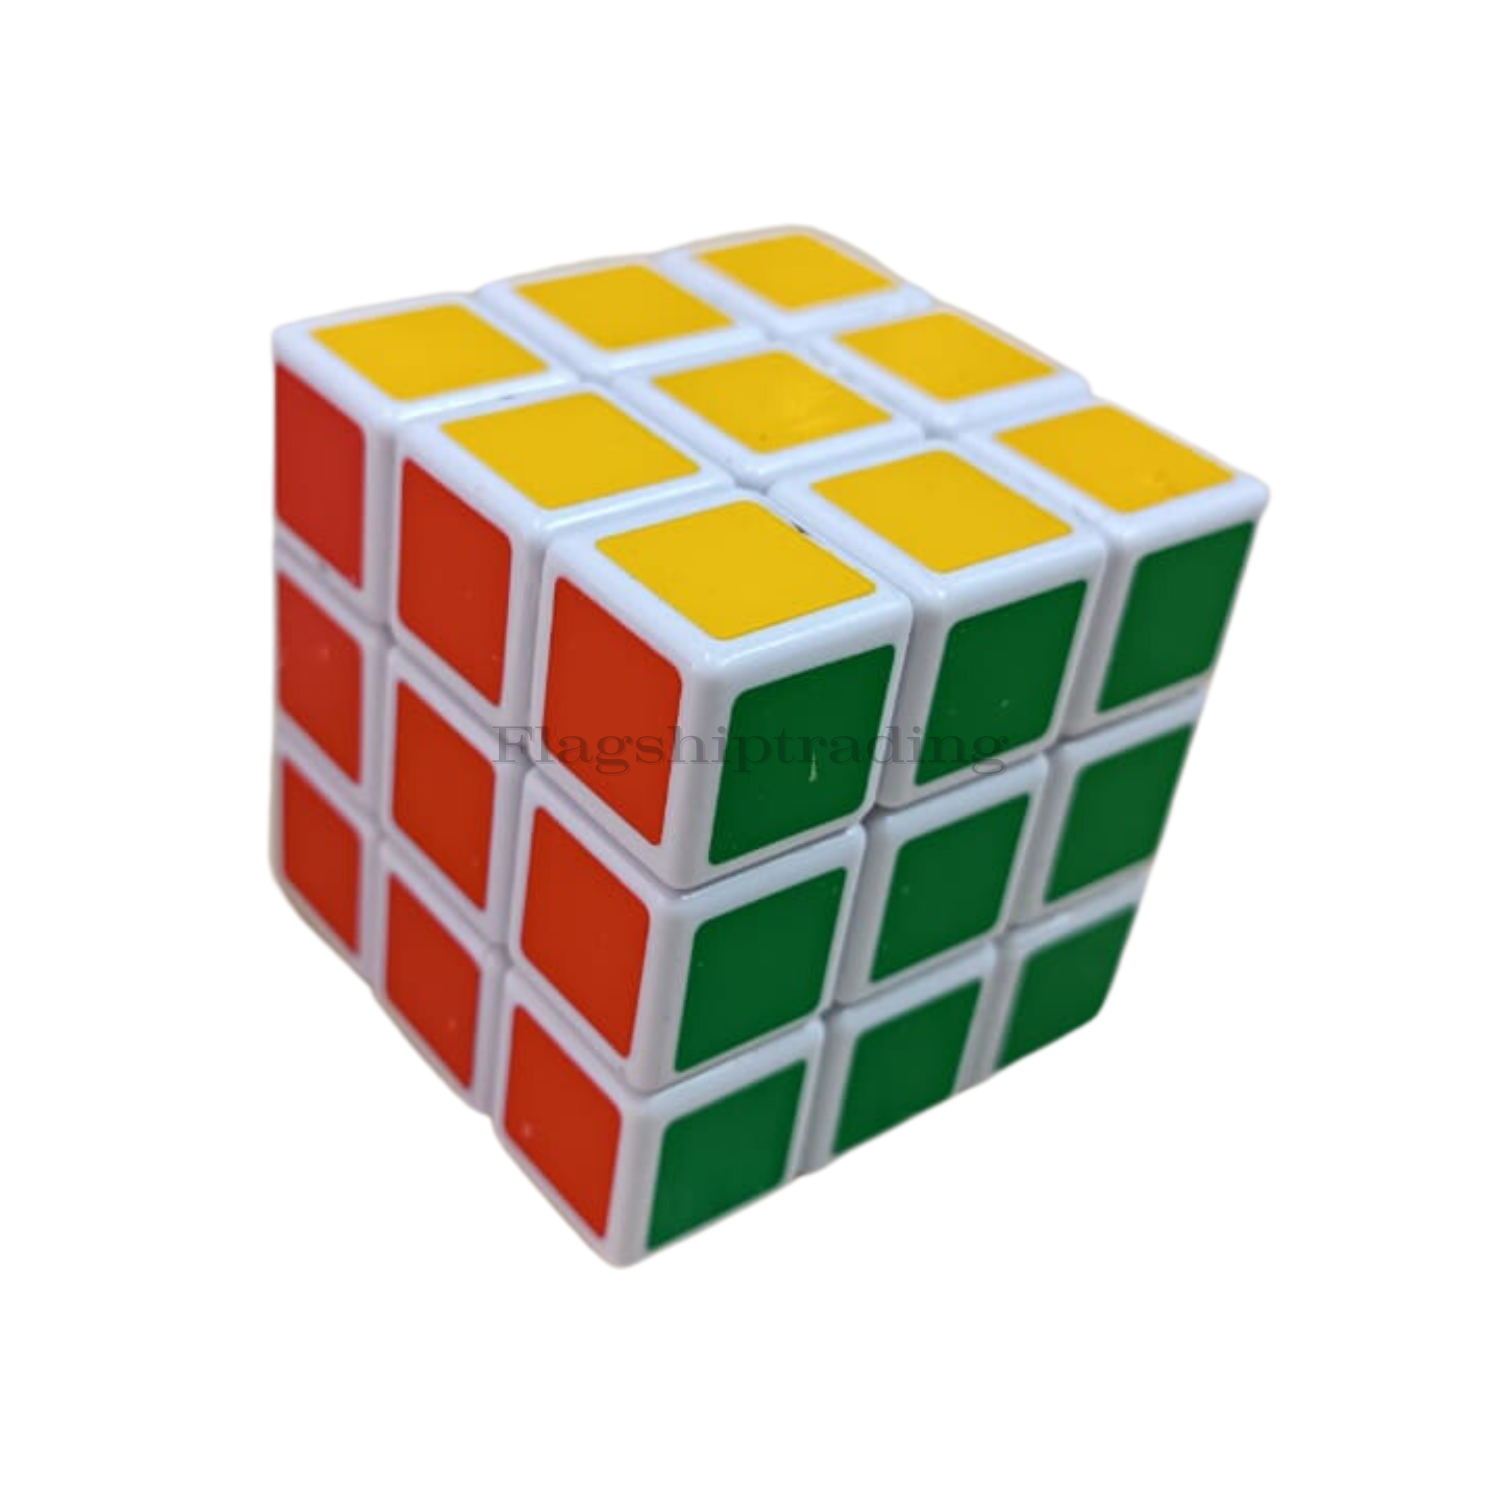 TANCH QIYI Speed Cube 3x3 Stickerless Magic Cube Puzzle Toy Colorful